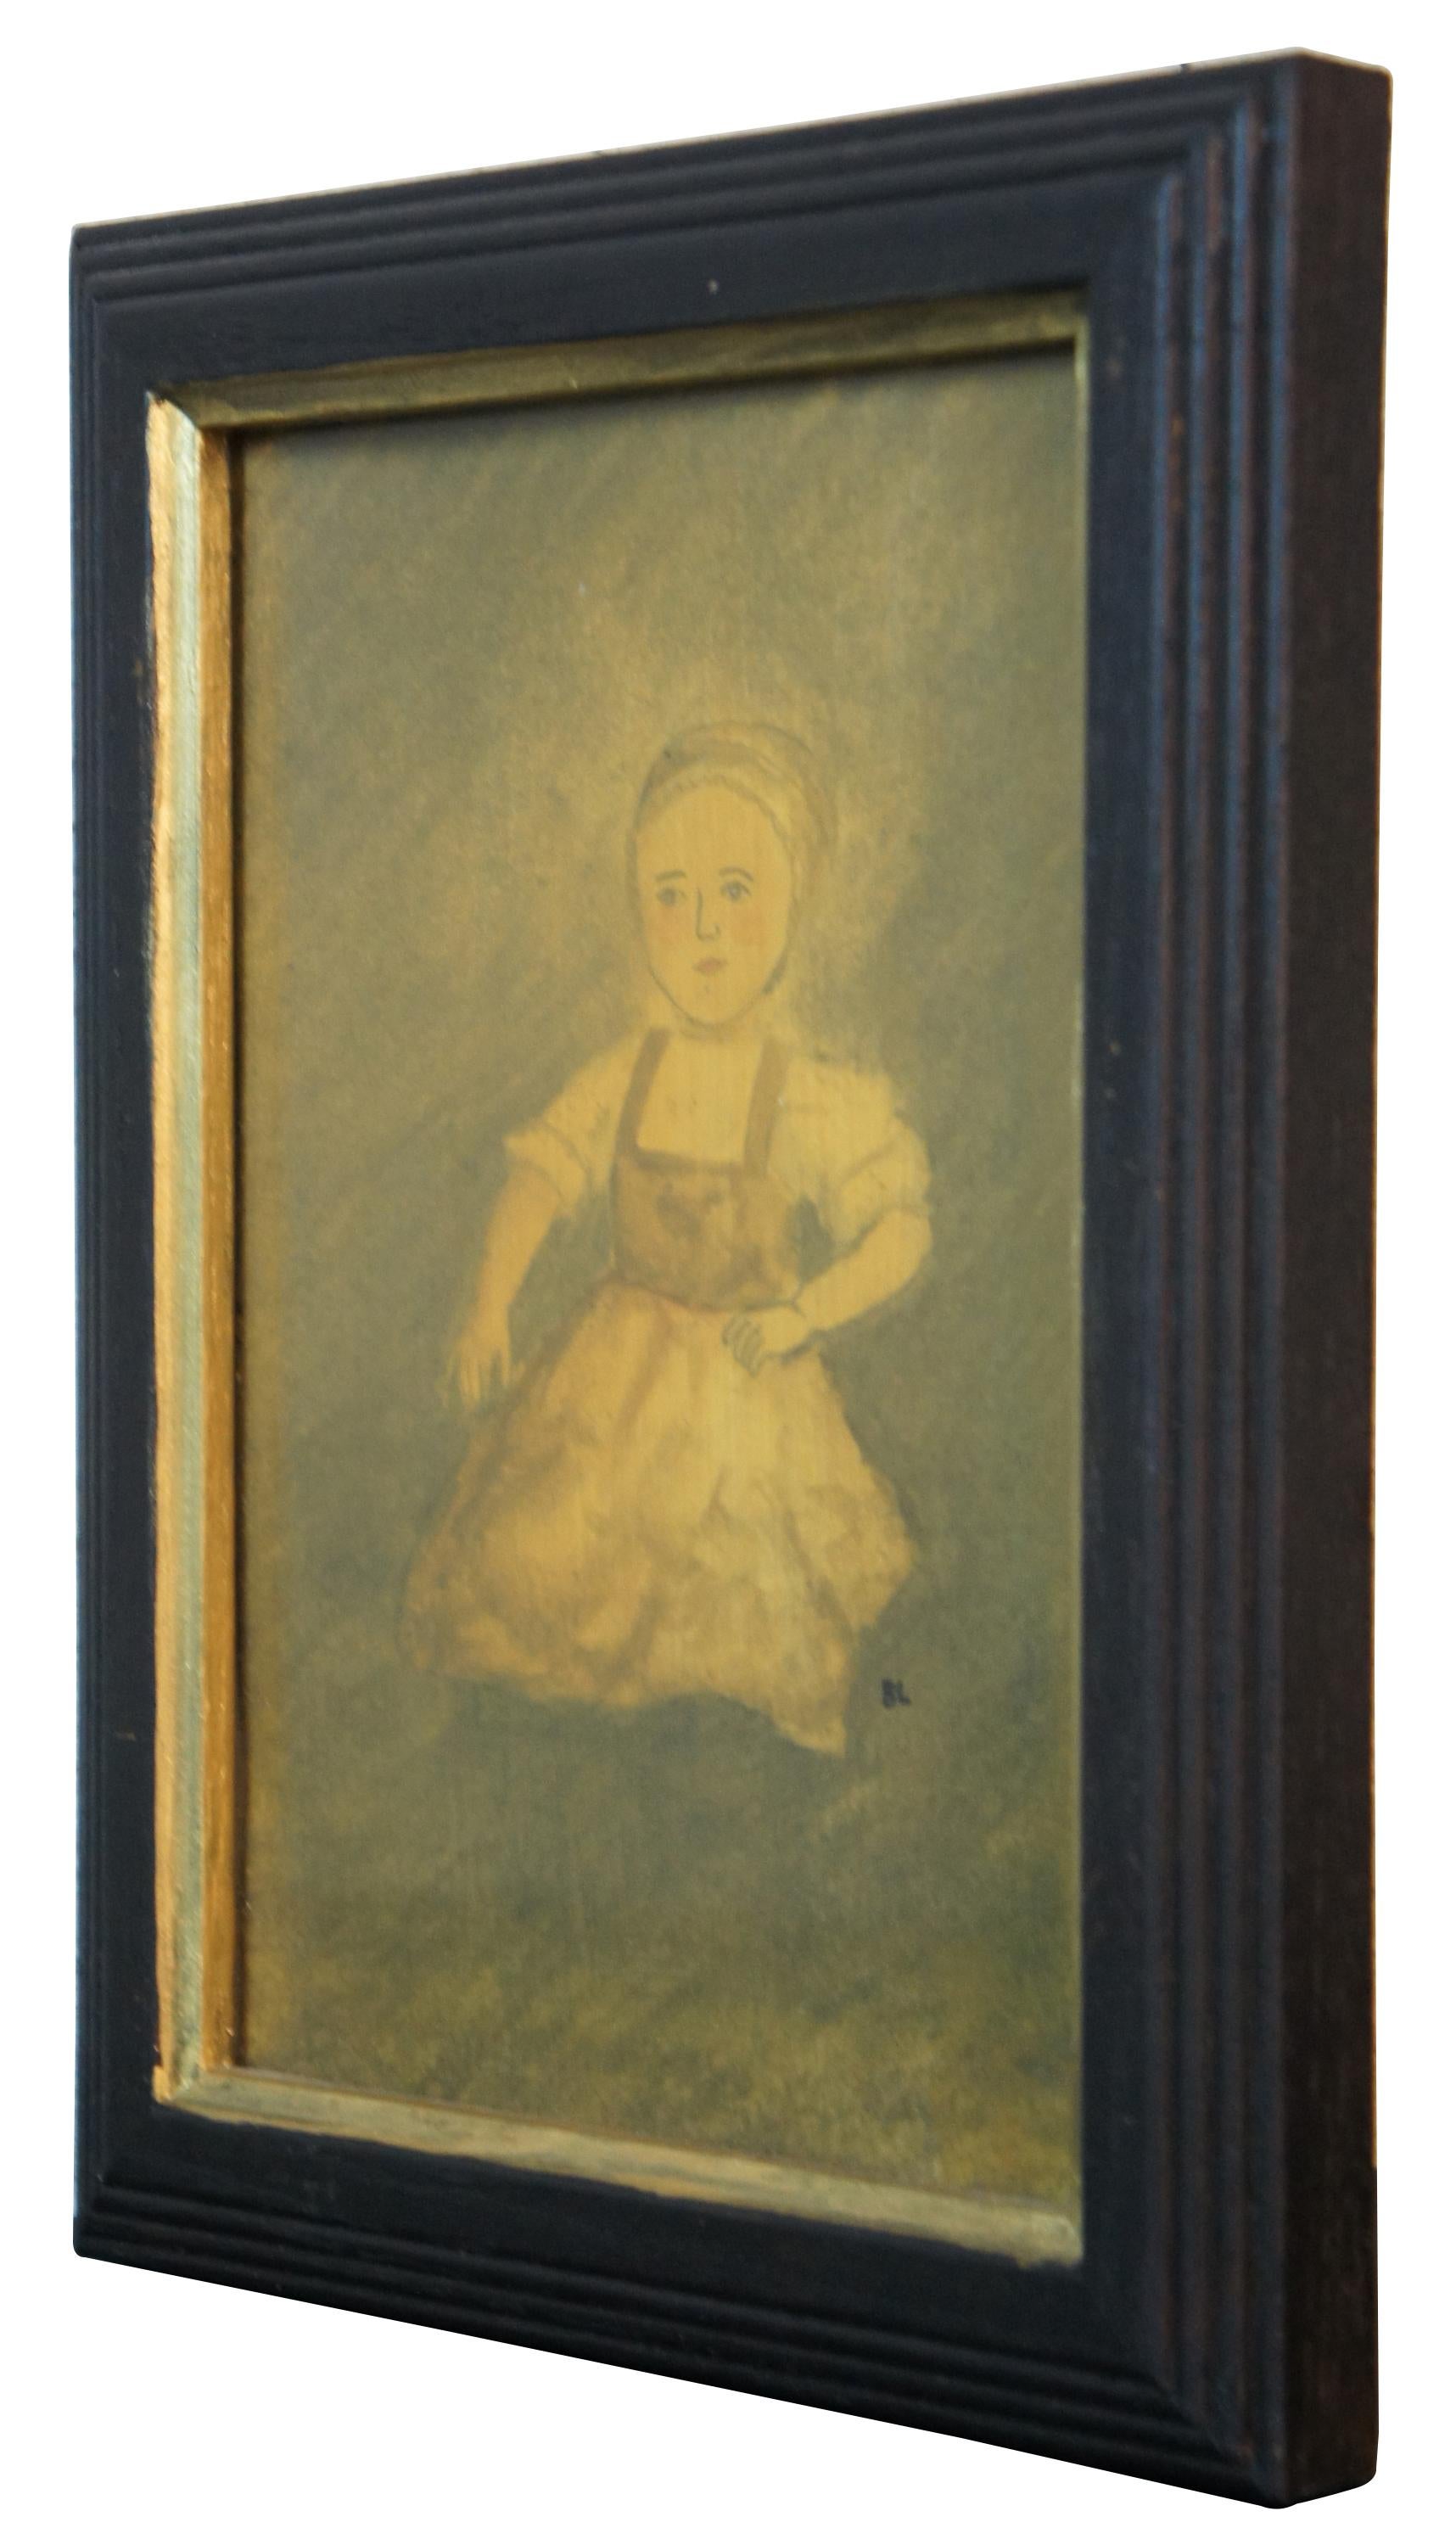 Vintage watercolor painting of a young colonial girl in antique clothing reminiscent of 17th century pilgrims, signed on reverse “Billy Lynch.”

Measures: 6.25” x 0.875” x 8.25” / sans frame - 4.5” x 6.5” (Width x Depth x Height).